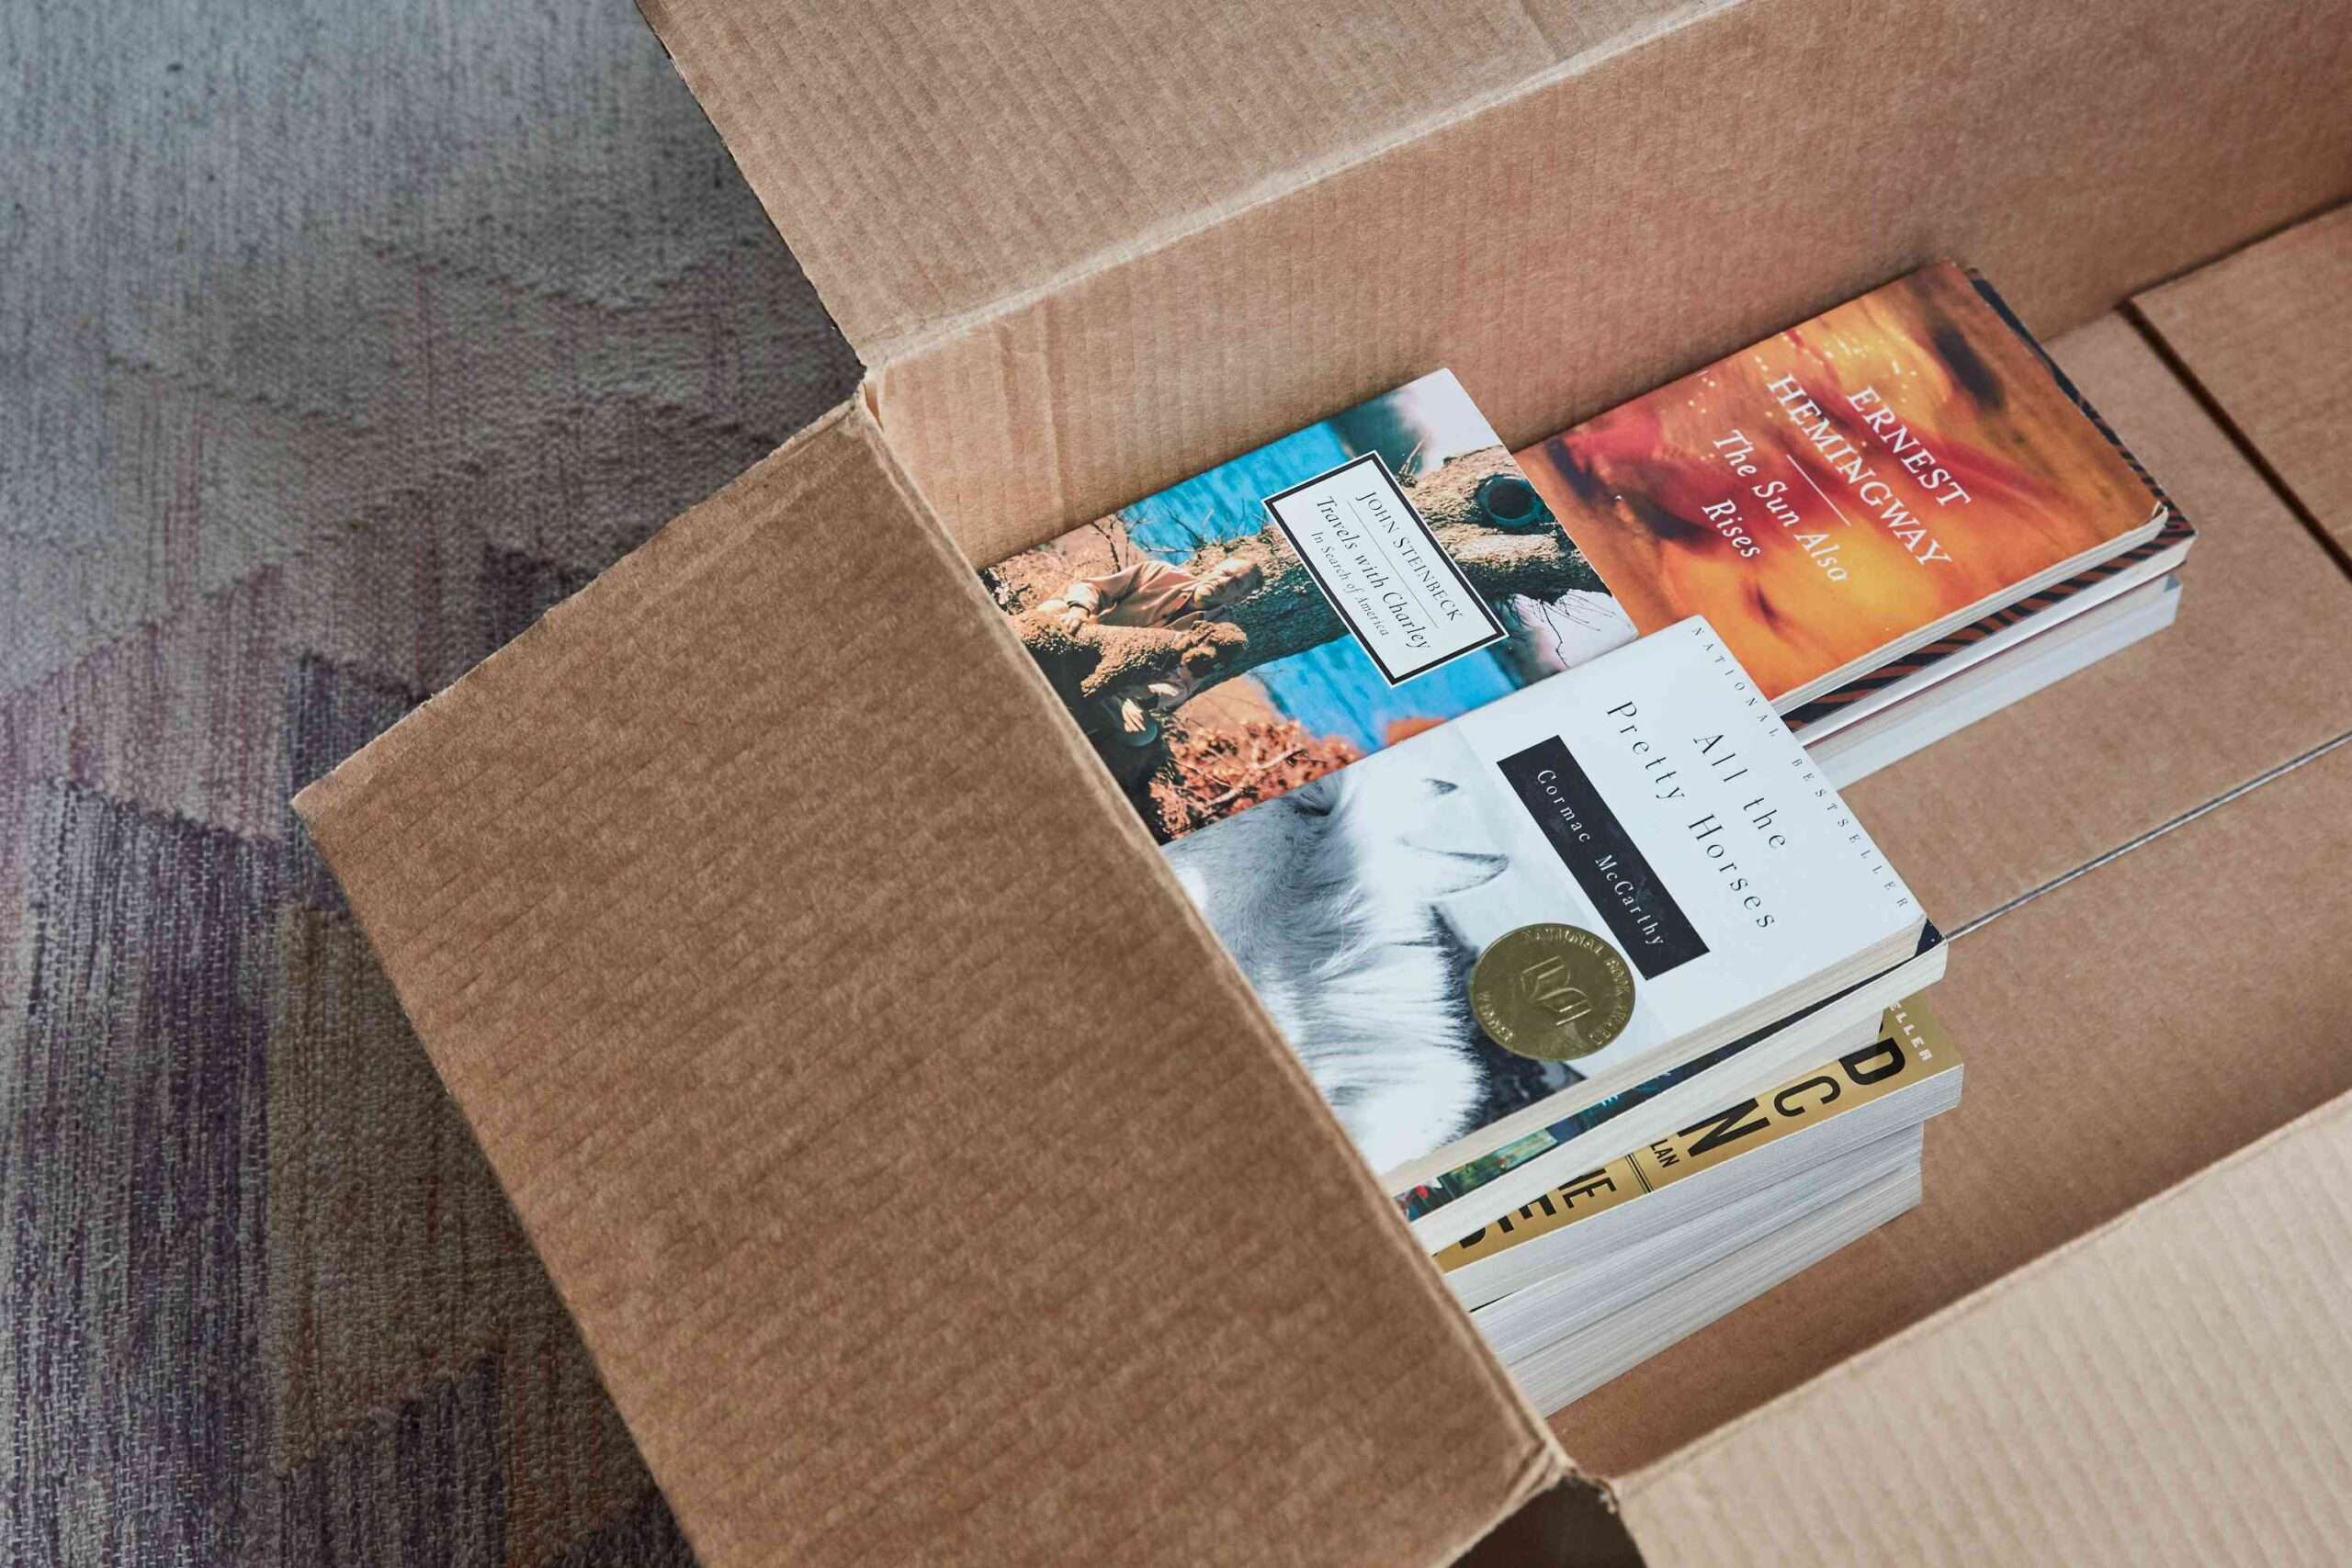 Tips on How To Pack Books When Moving